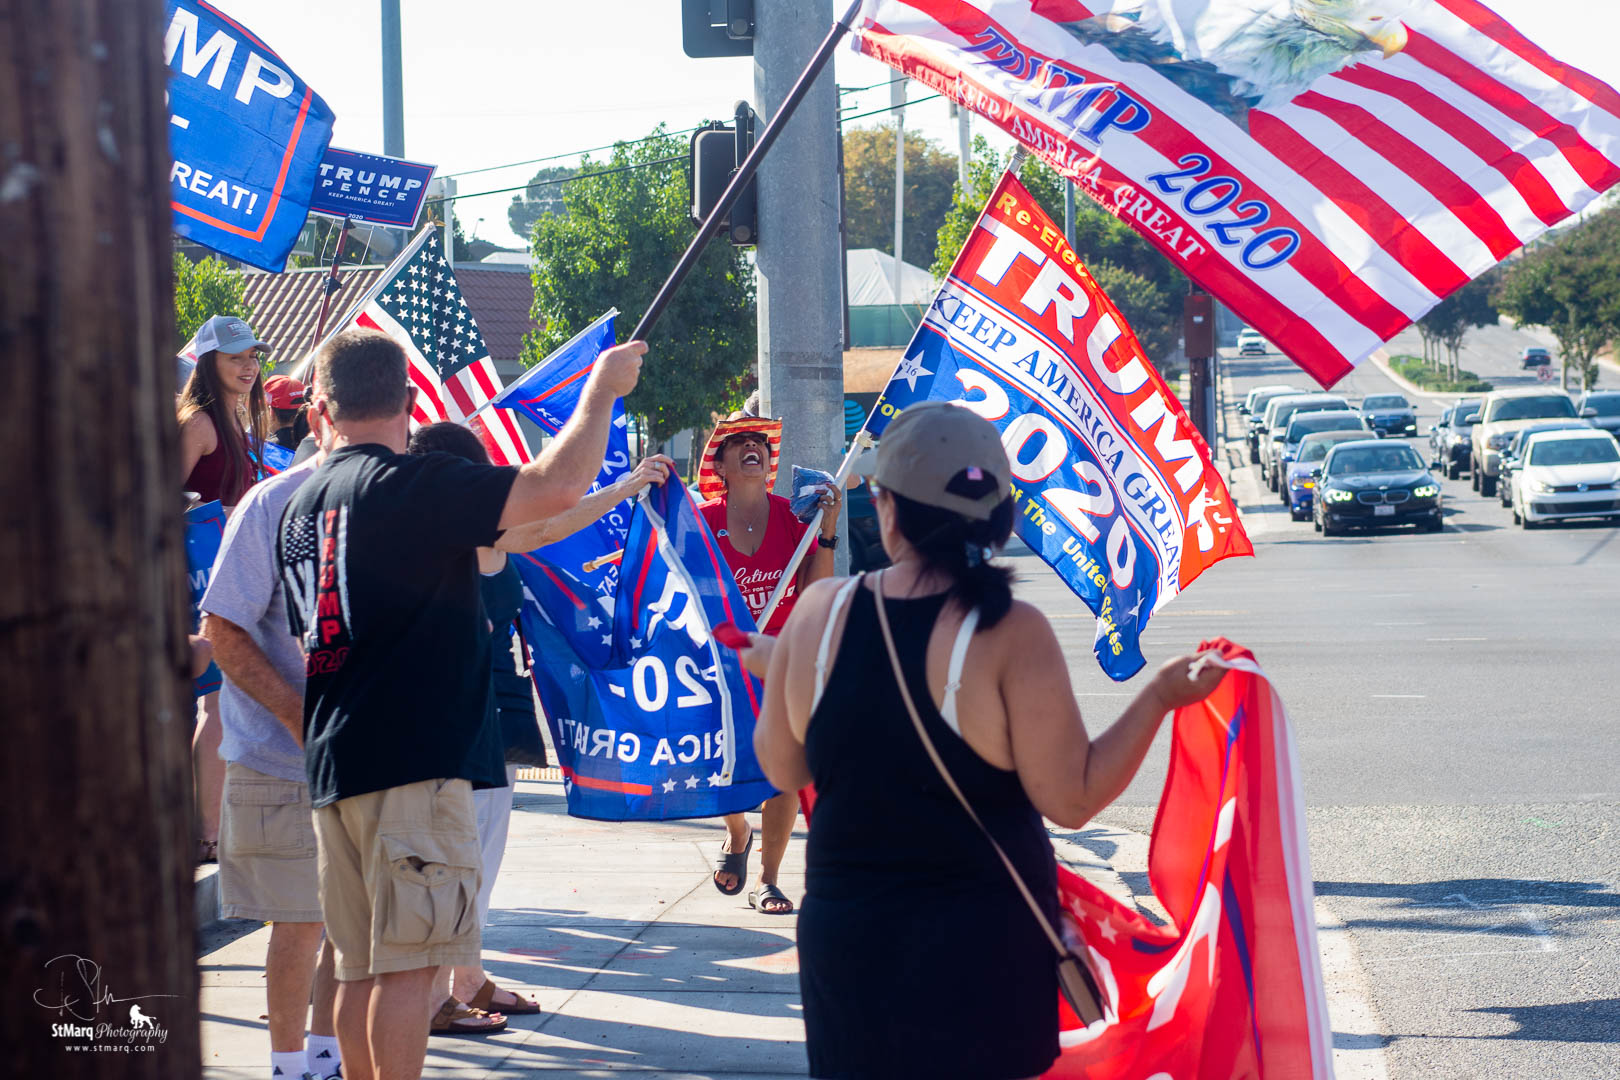 Backers of president Trump hold flags to show their support on the corner of Beach Blvd. and Imperial Highway in La Habra, CA on Sunday, October 18, 2020. They were attempting to show that California has supporters of the president even though it is usually written off as a Democrat stronghold.